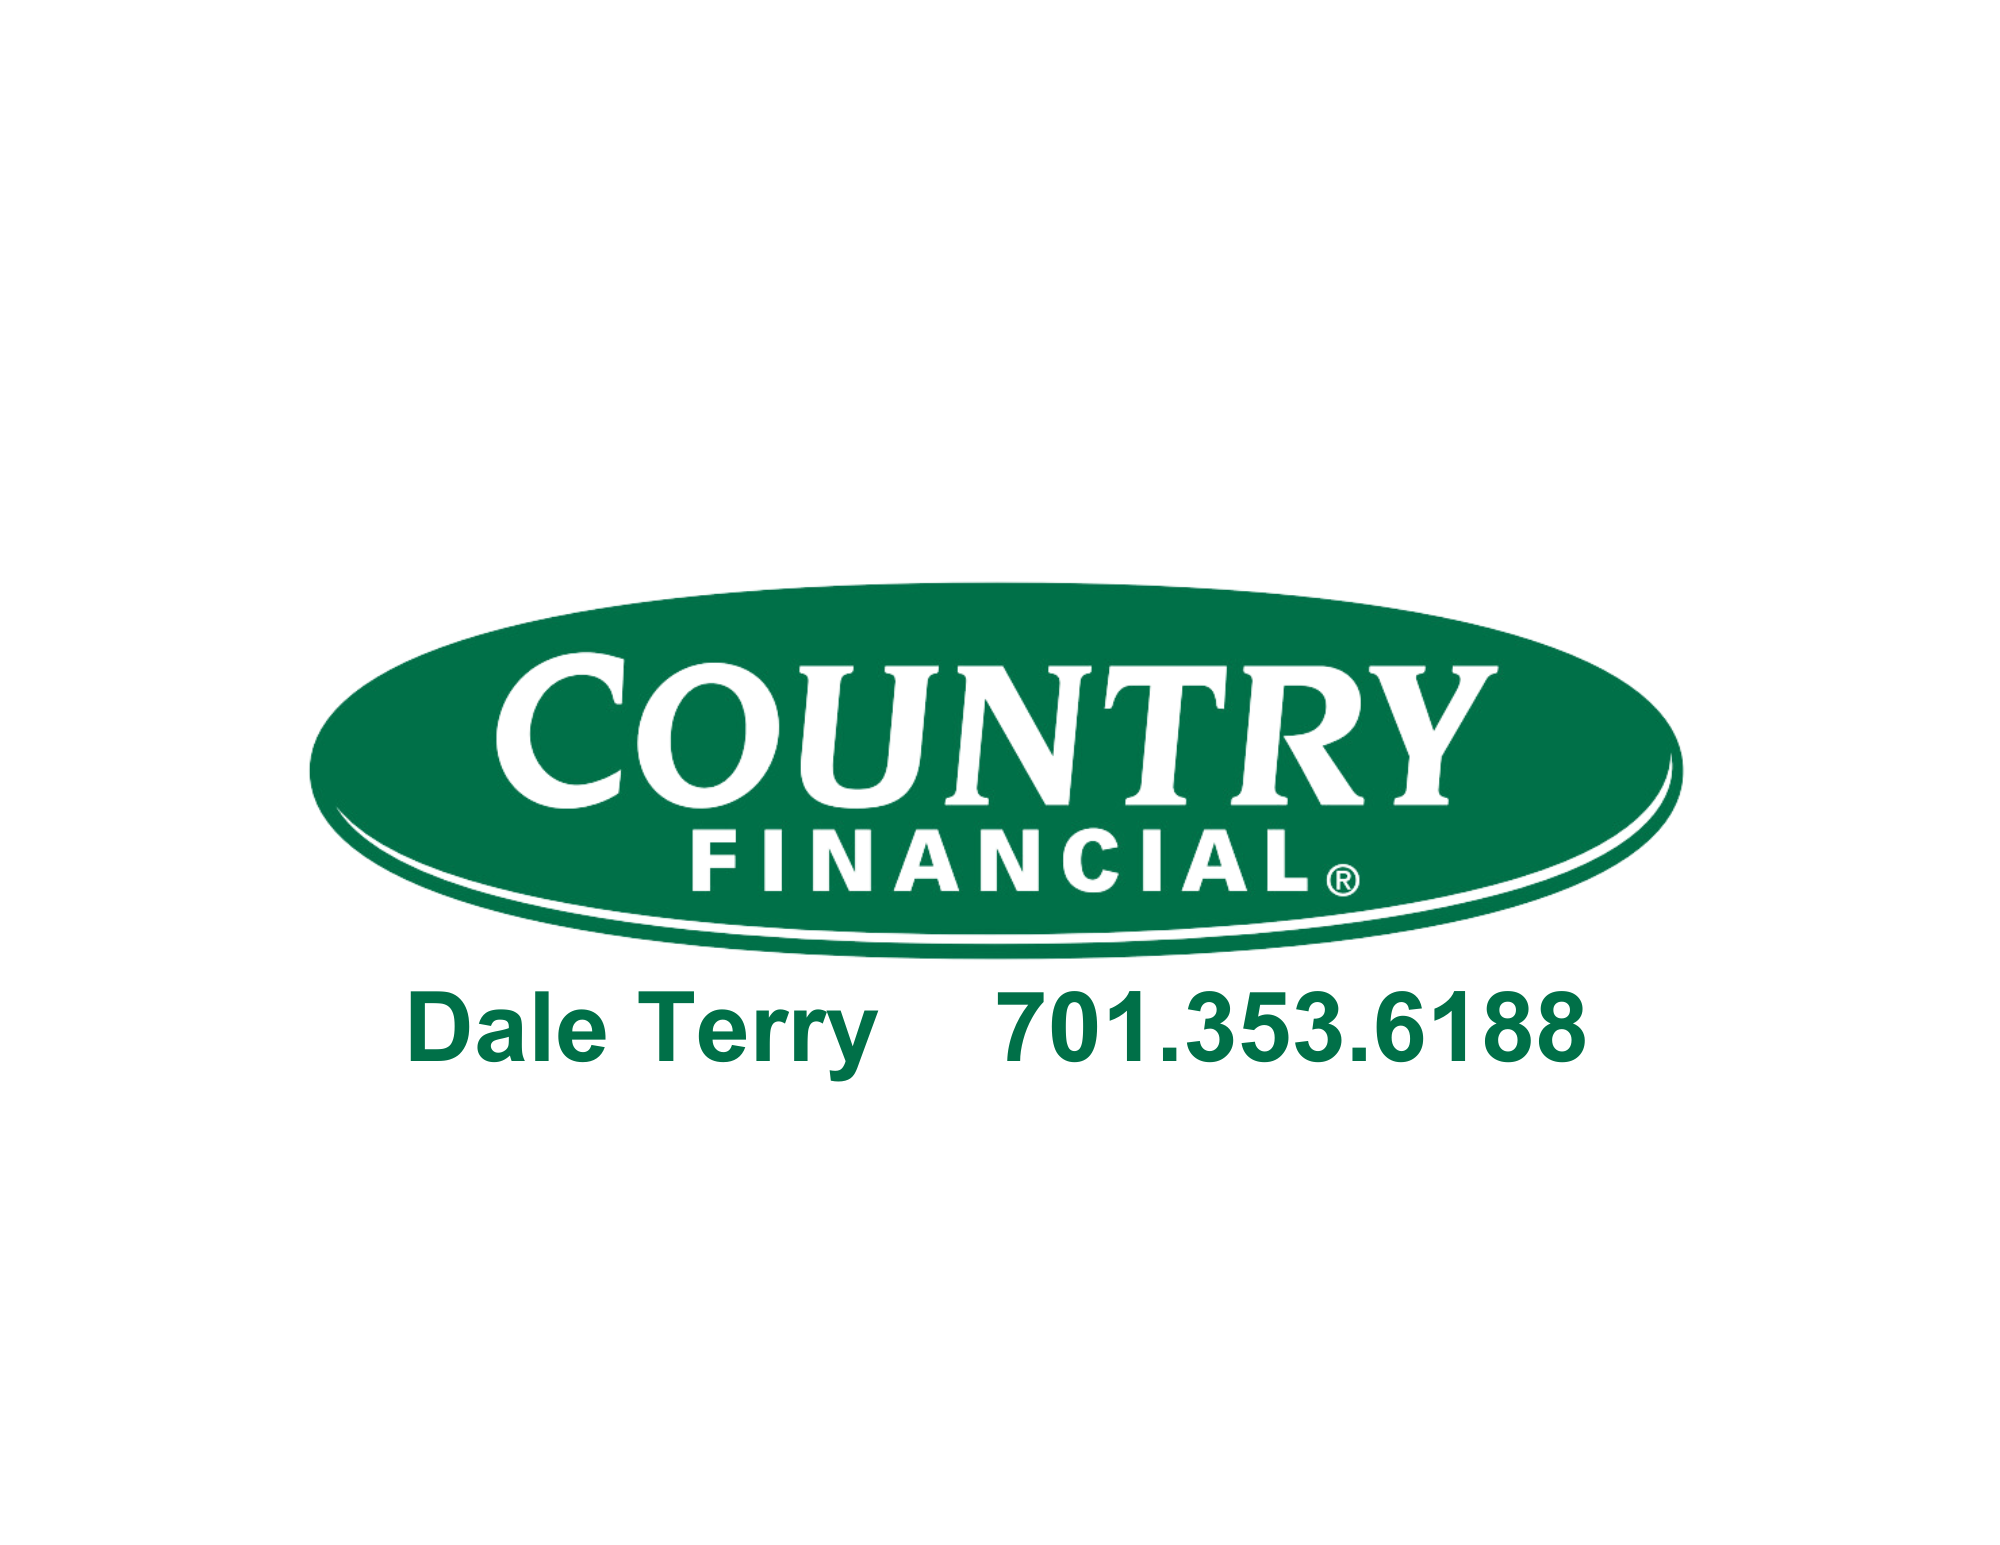 COUNTRY Financial logo in green with white font - Dale Terry - 7001.353.6188 below